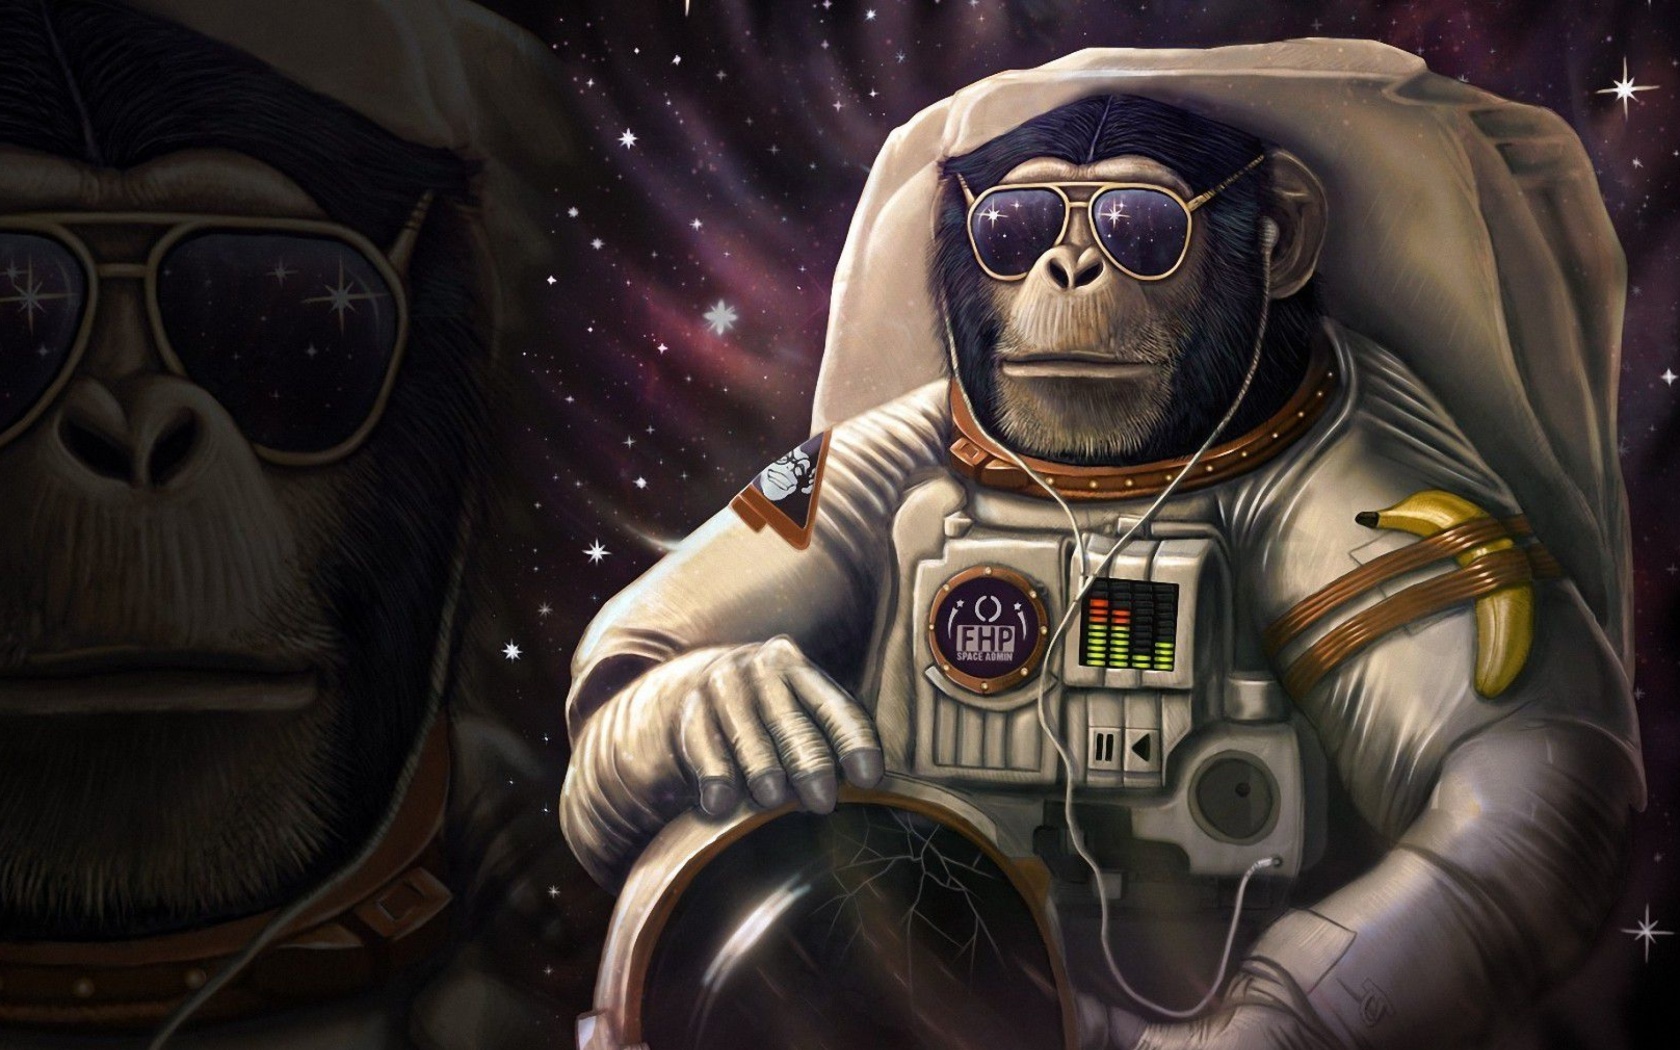 Monkeys and apes in space screenshot #1 1680x1050